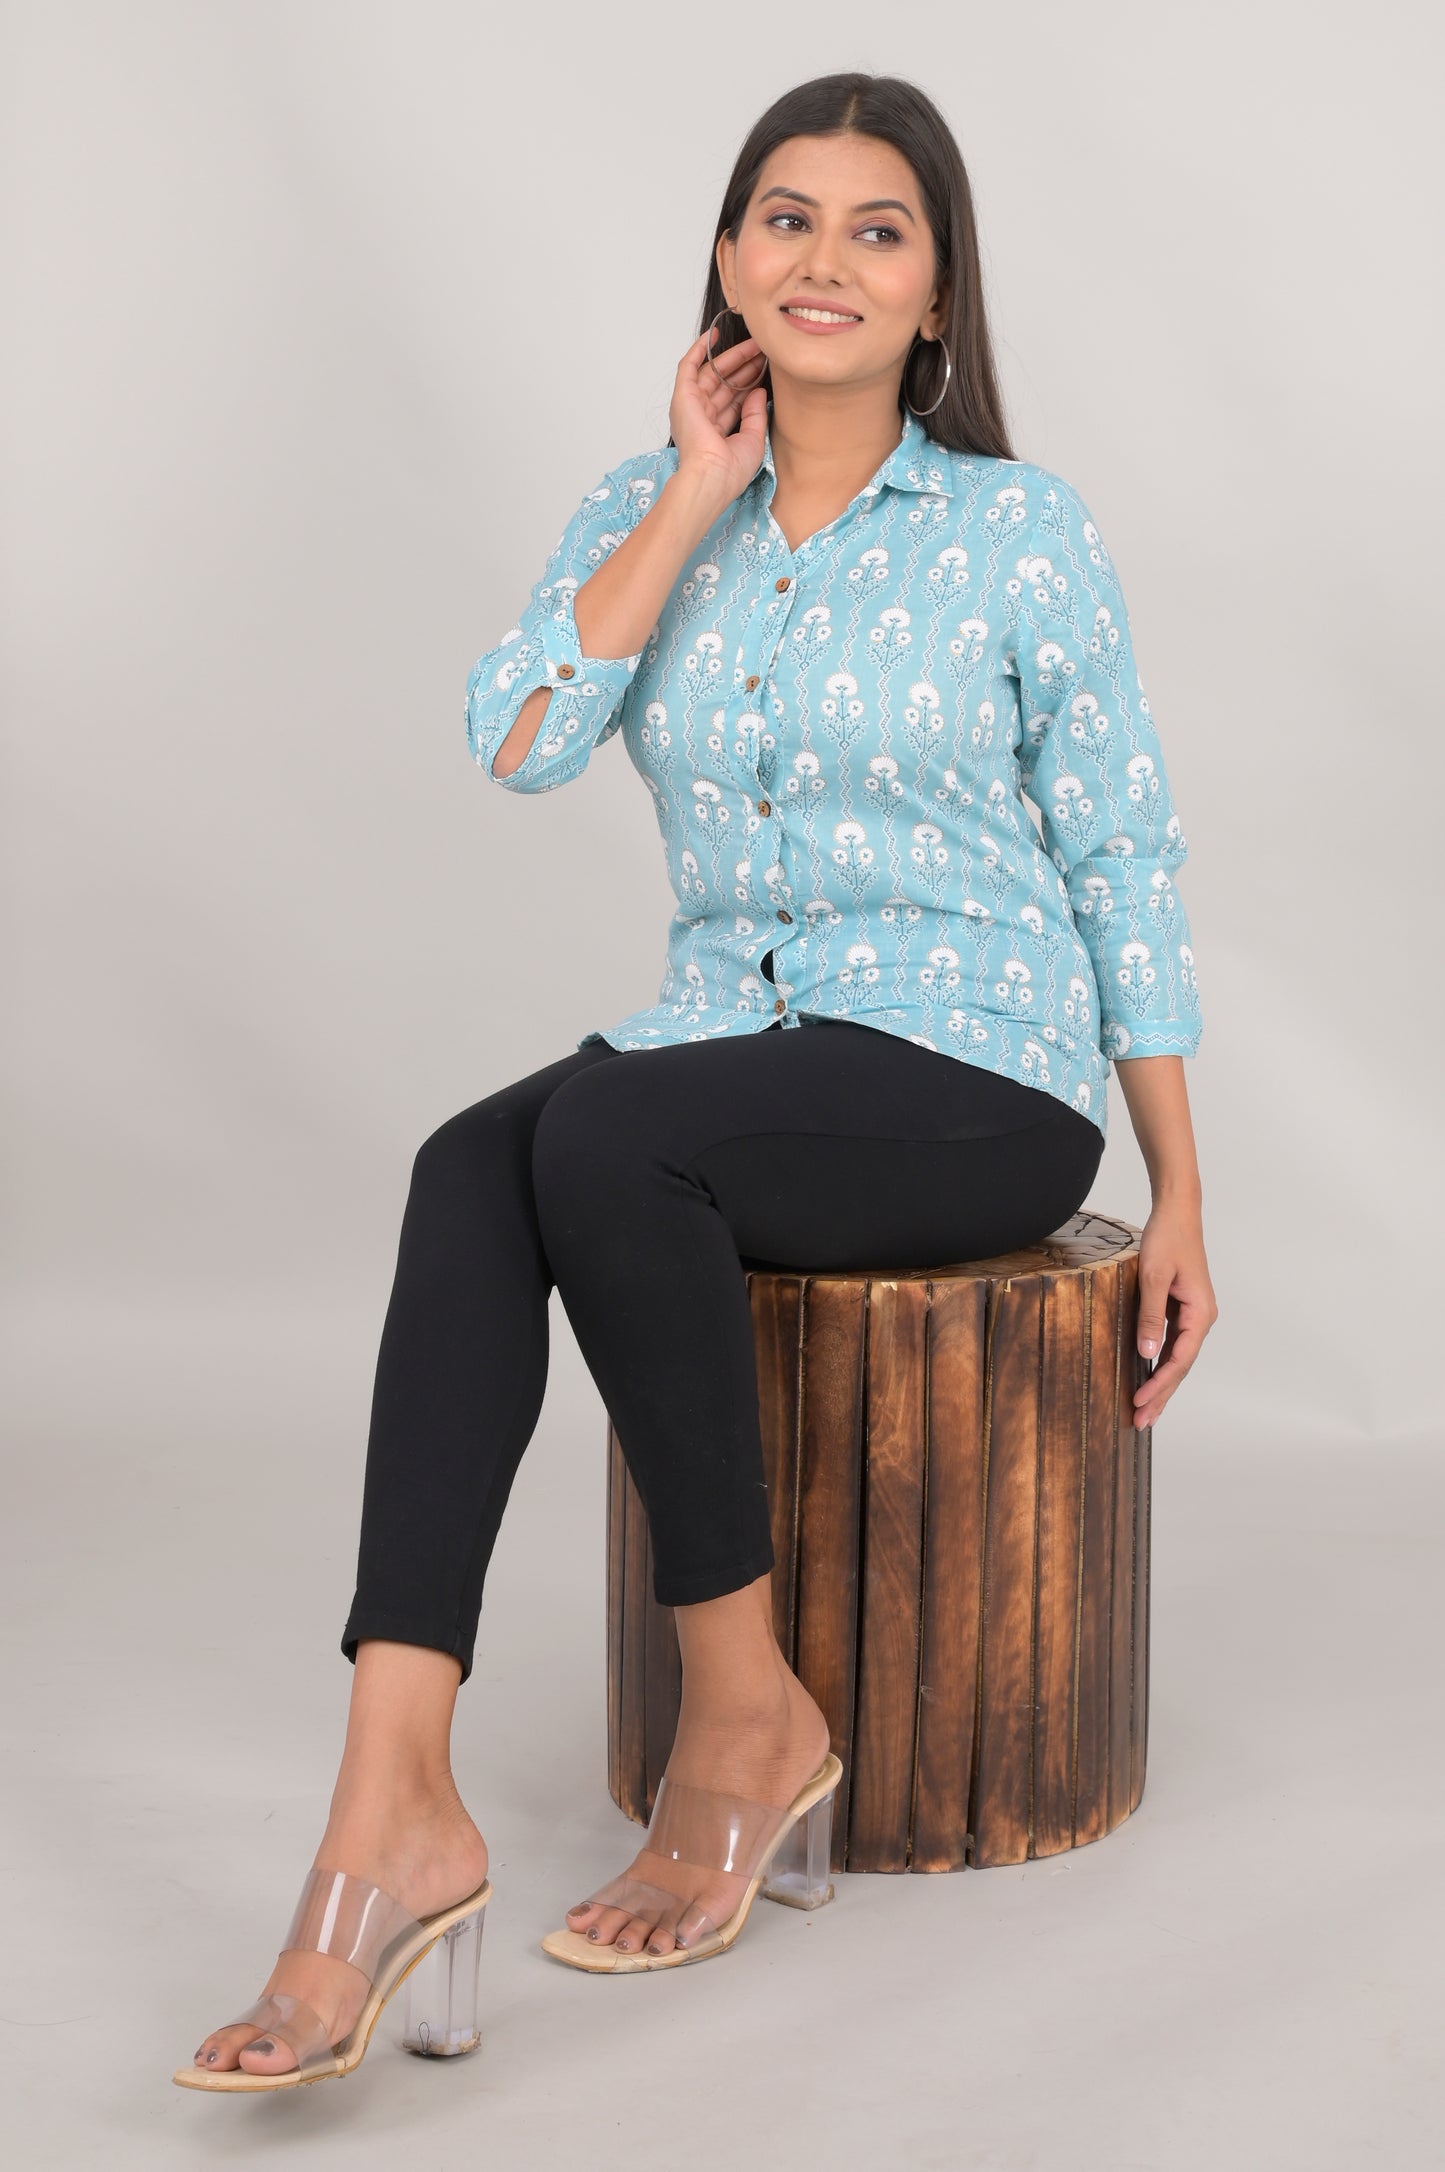 Women's Ethnic Floral Printed Shirts